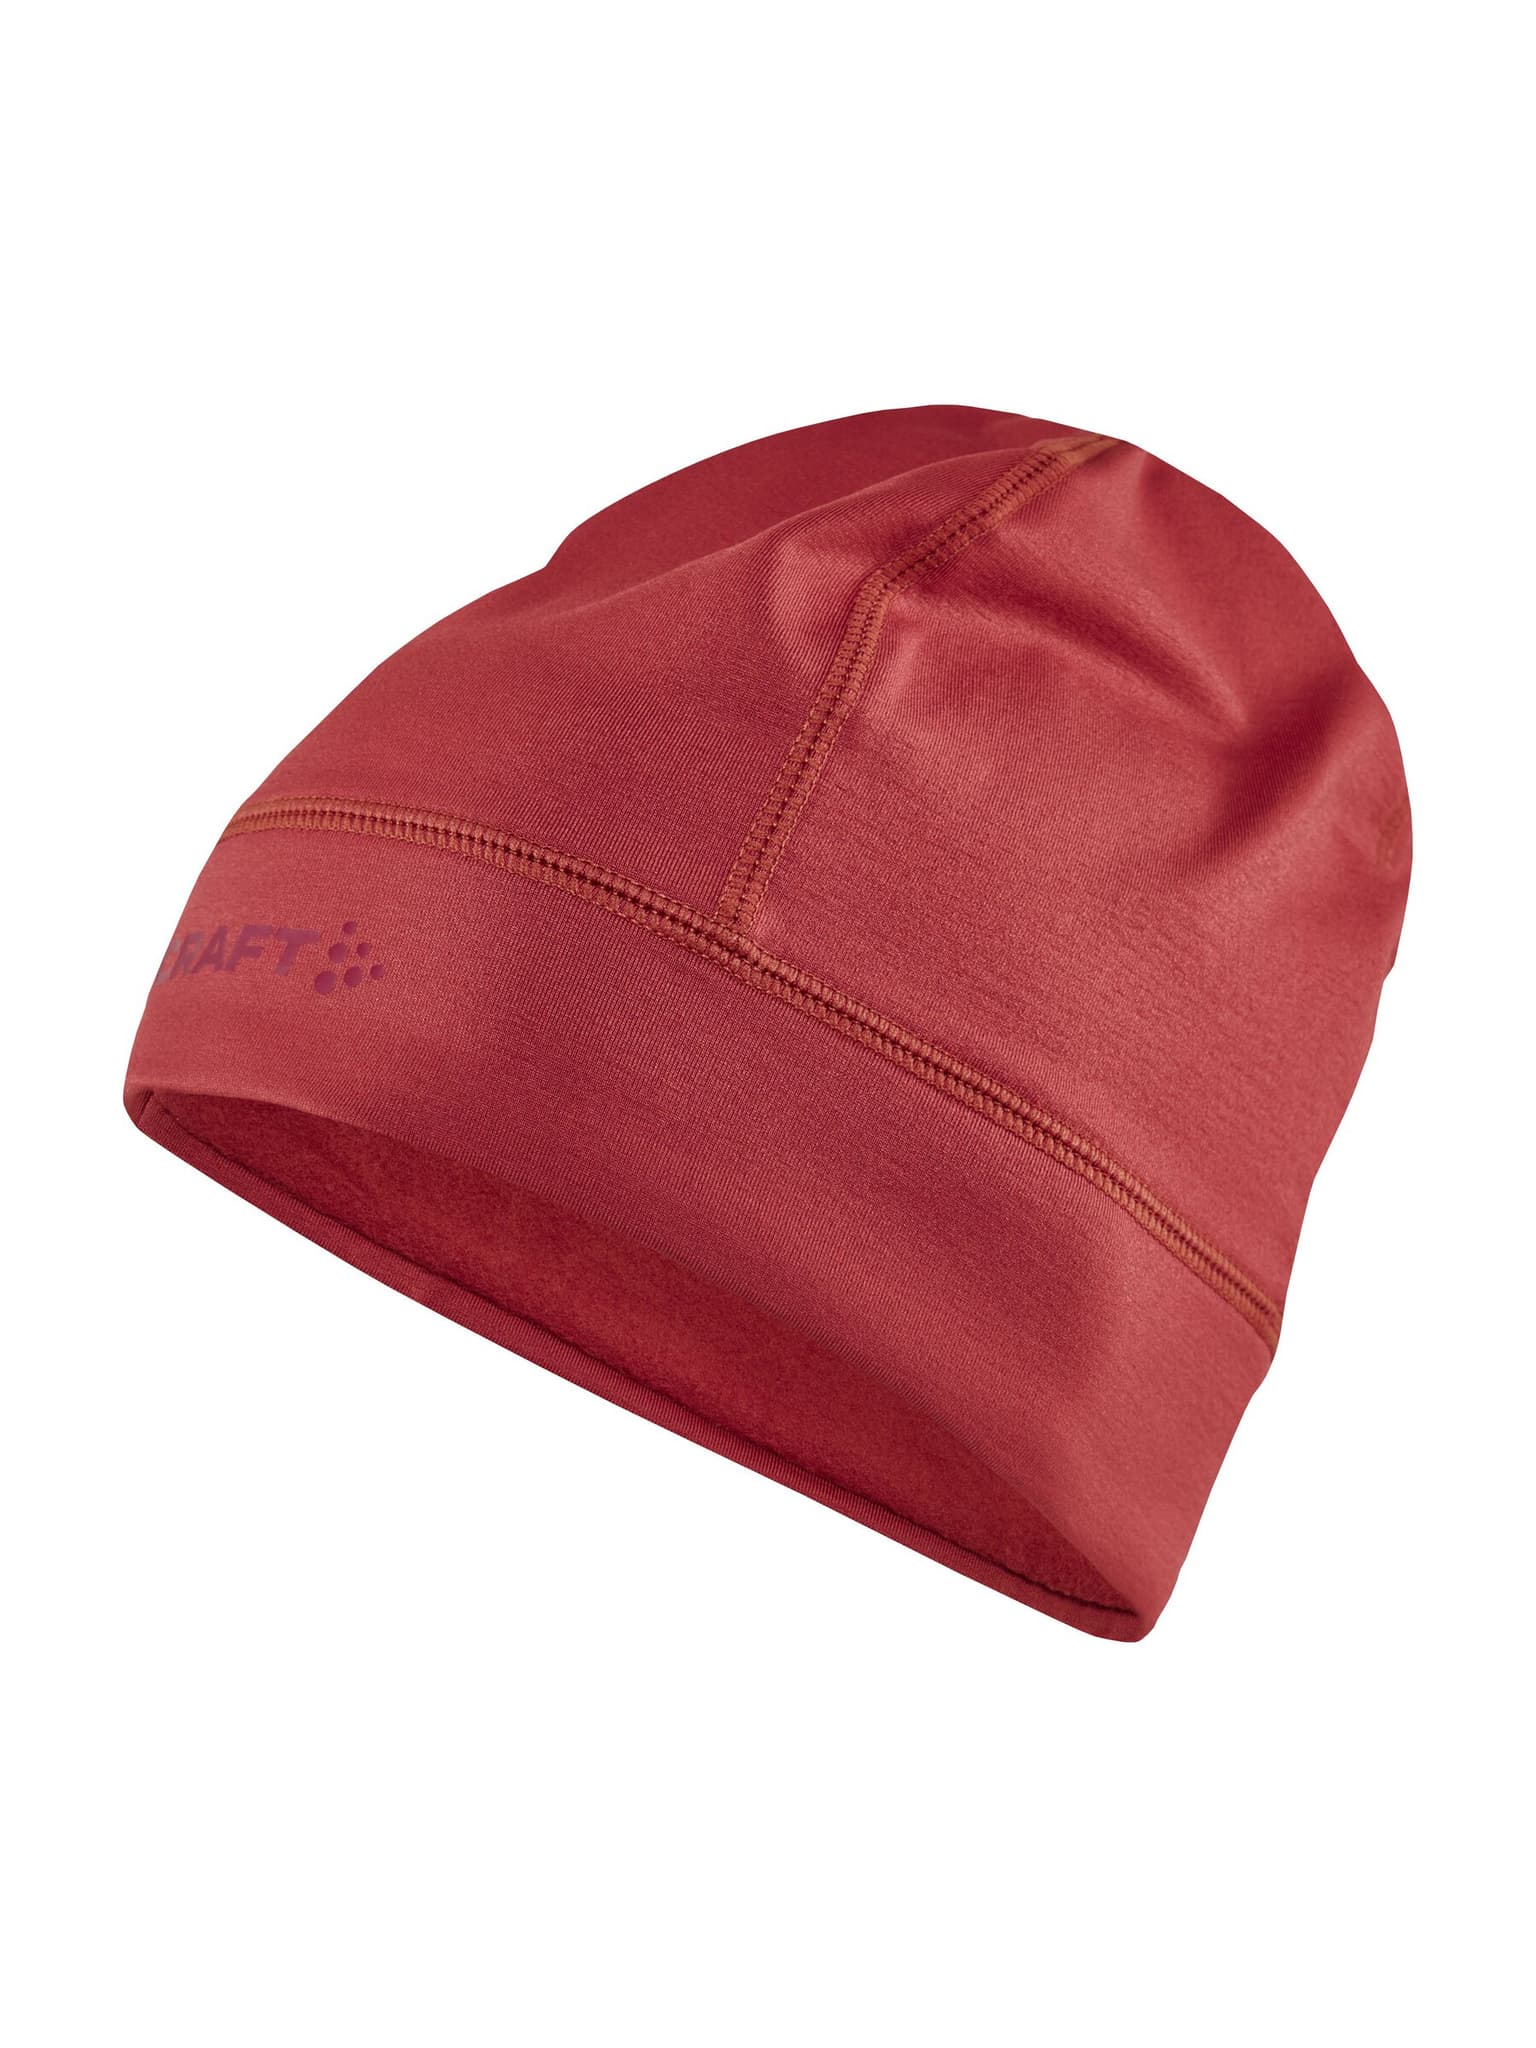 Craft Craft CORE ESSENCE THERMAL HAT Berretto rosso 1